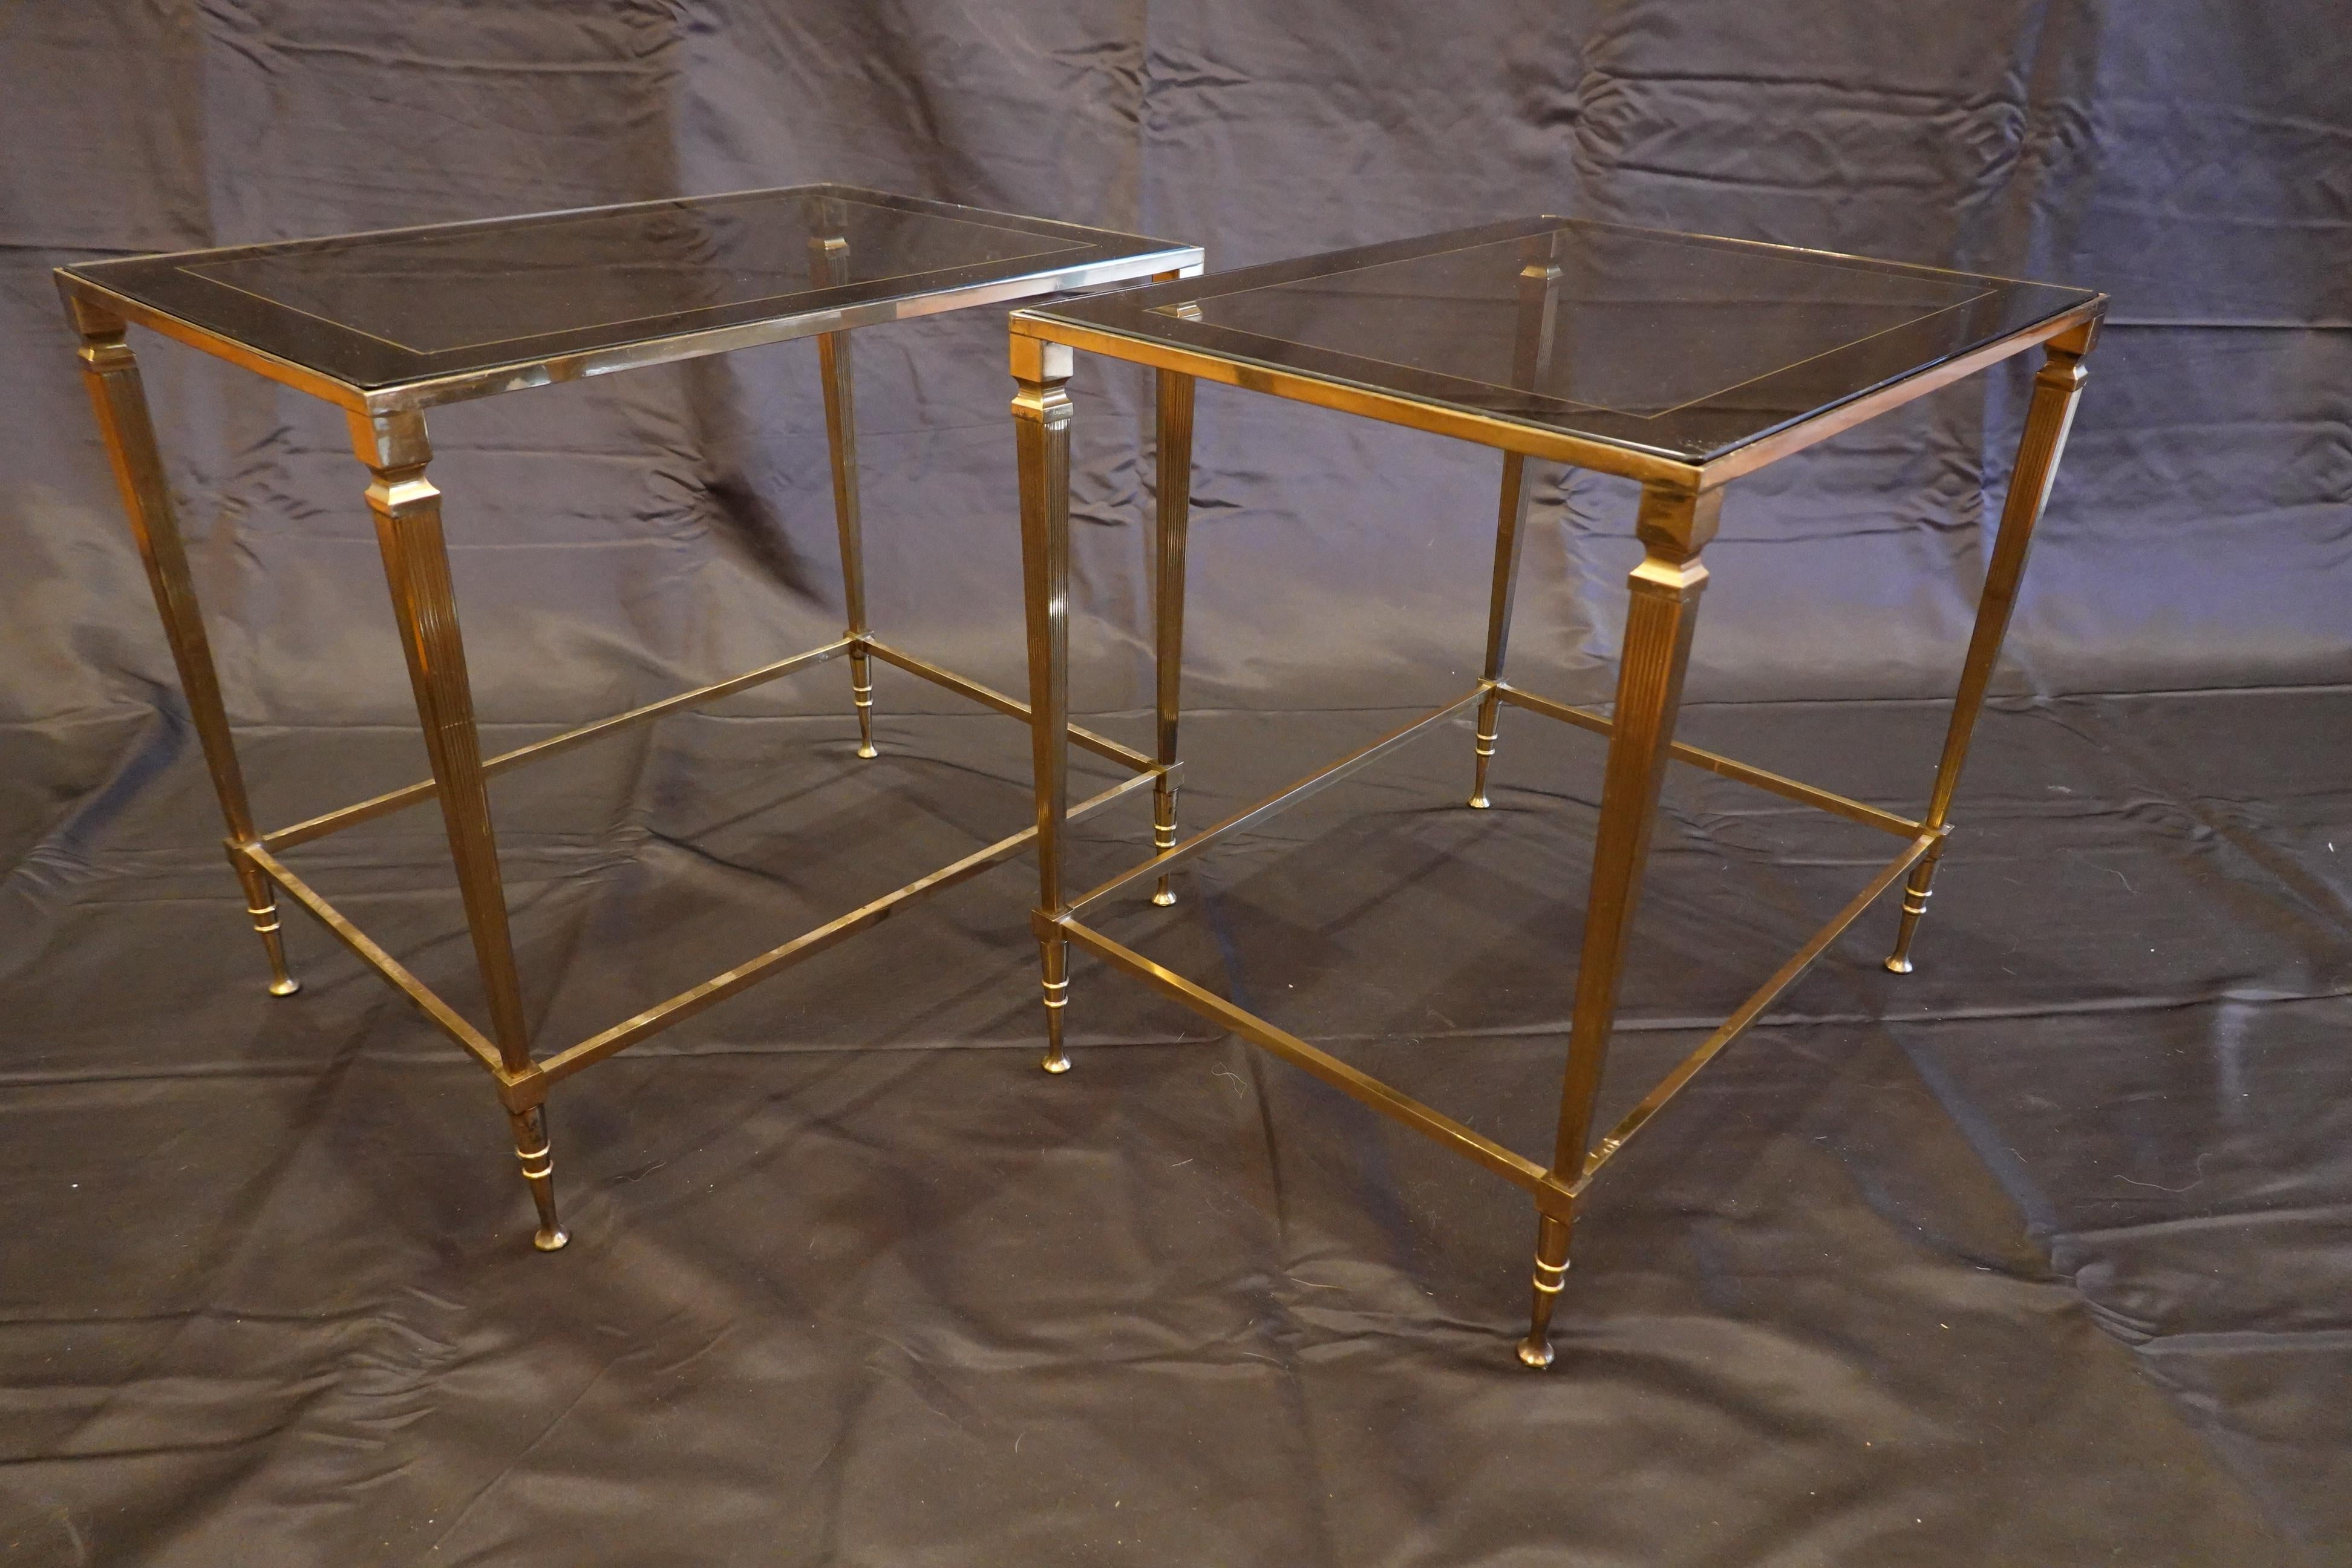 Pair of Italian gilt-brass Mid-Century Modern side tables with glass tops, (circa 1970s). These elegant tables feature glass tops that are slightly Smokey with silvered bands around the perimeter, and simple fluted legs tapering to the feet.